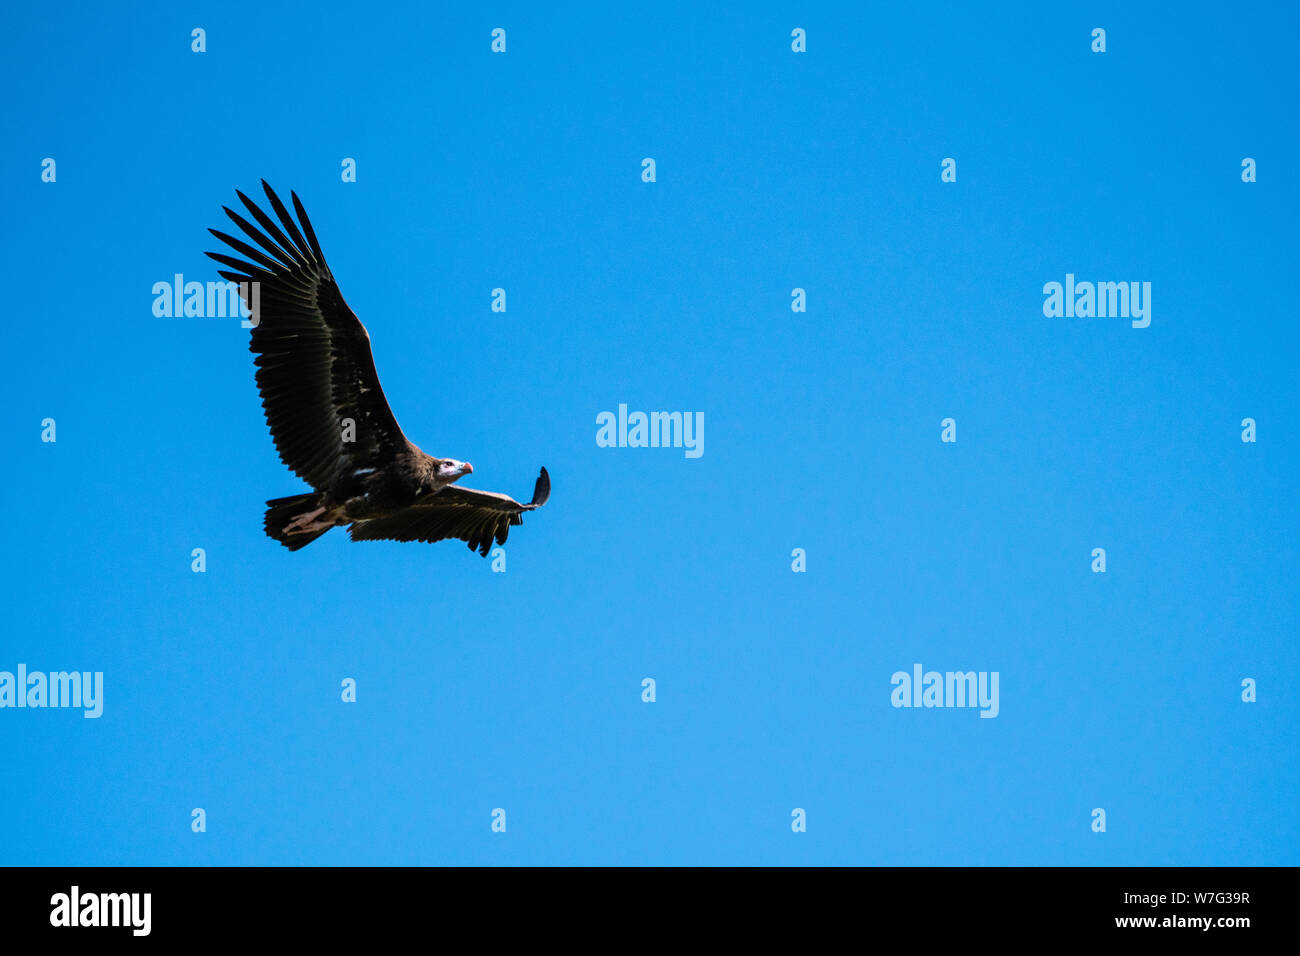 White-headed vulture (Trigonoceps occipitalis) Critically endangered bird species endemic to Africa. In flight with a blue sky background. Photographe Stock Photo